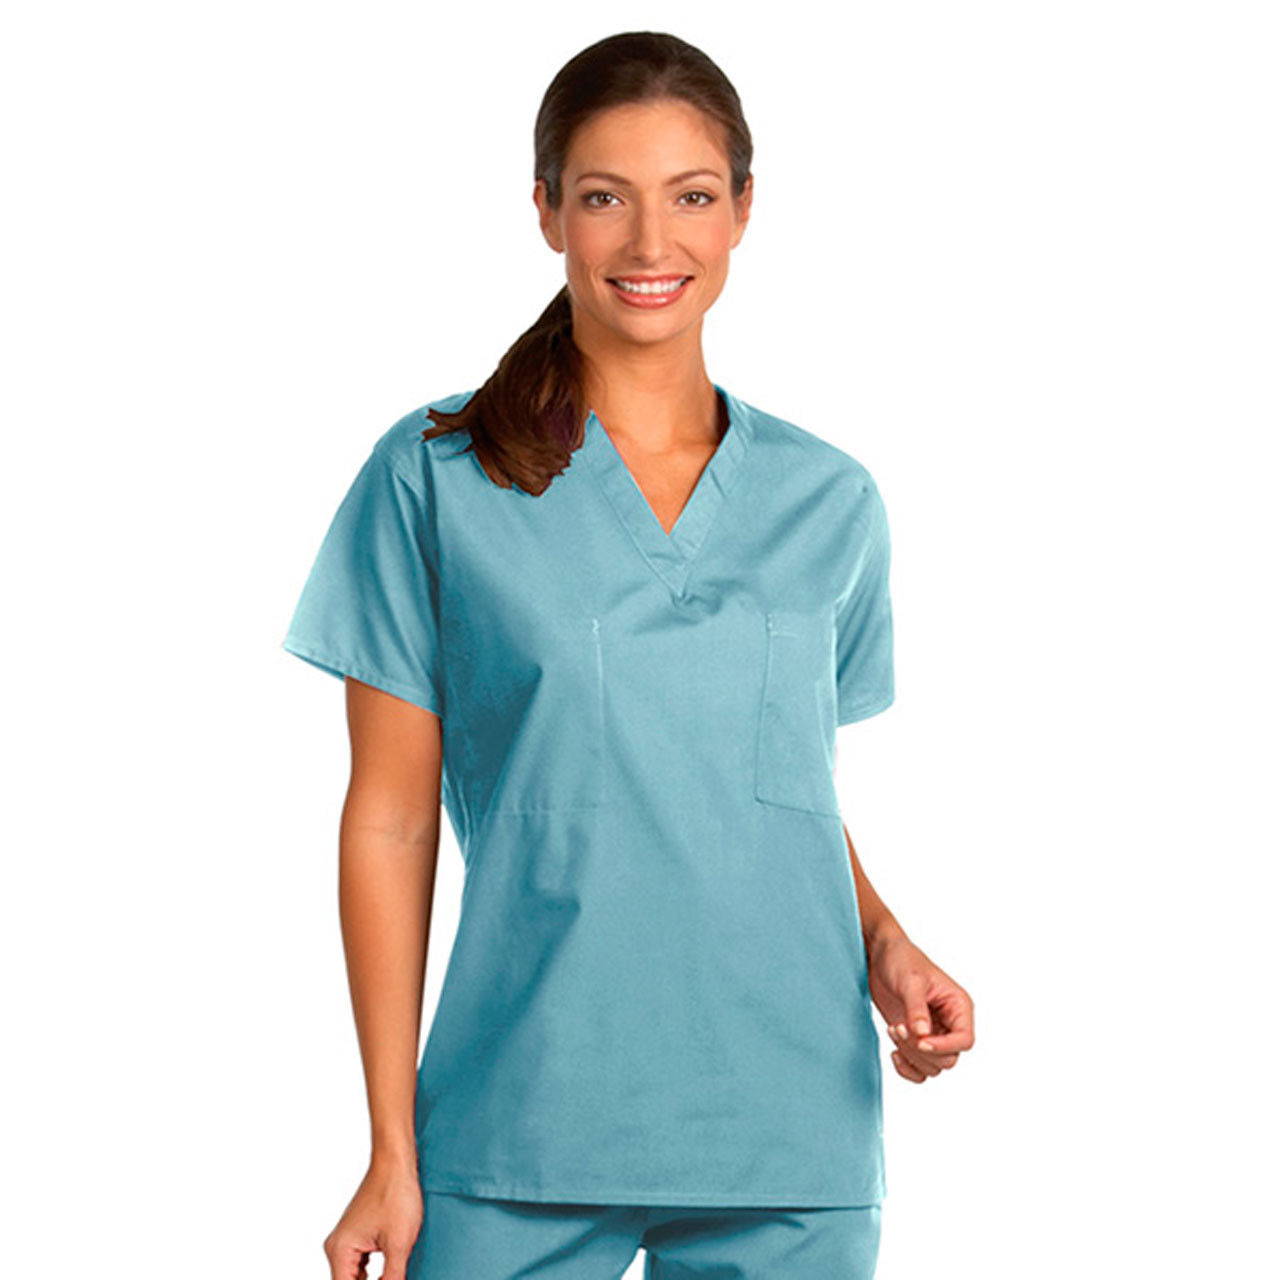 What are the specific features of these Misty Green unisex surgical scrubs with pocket?